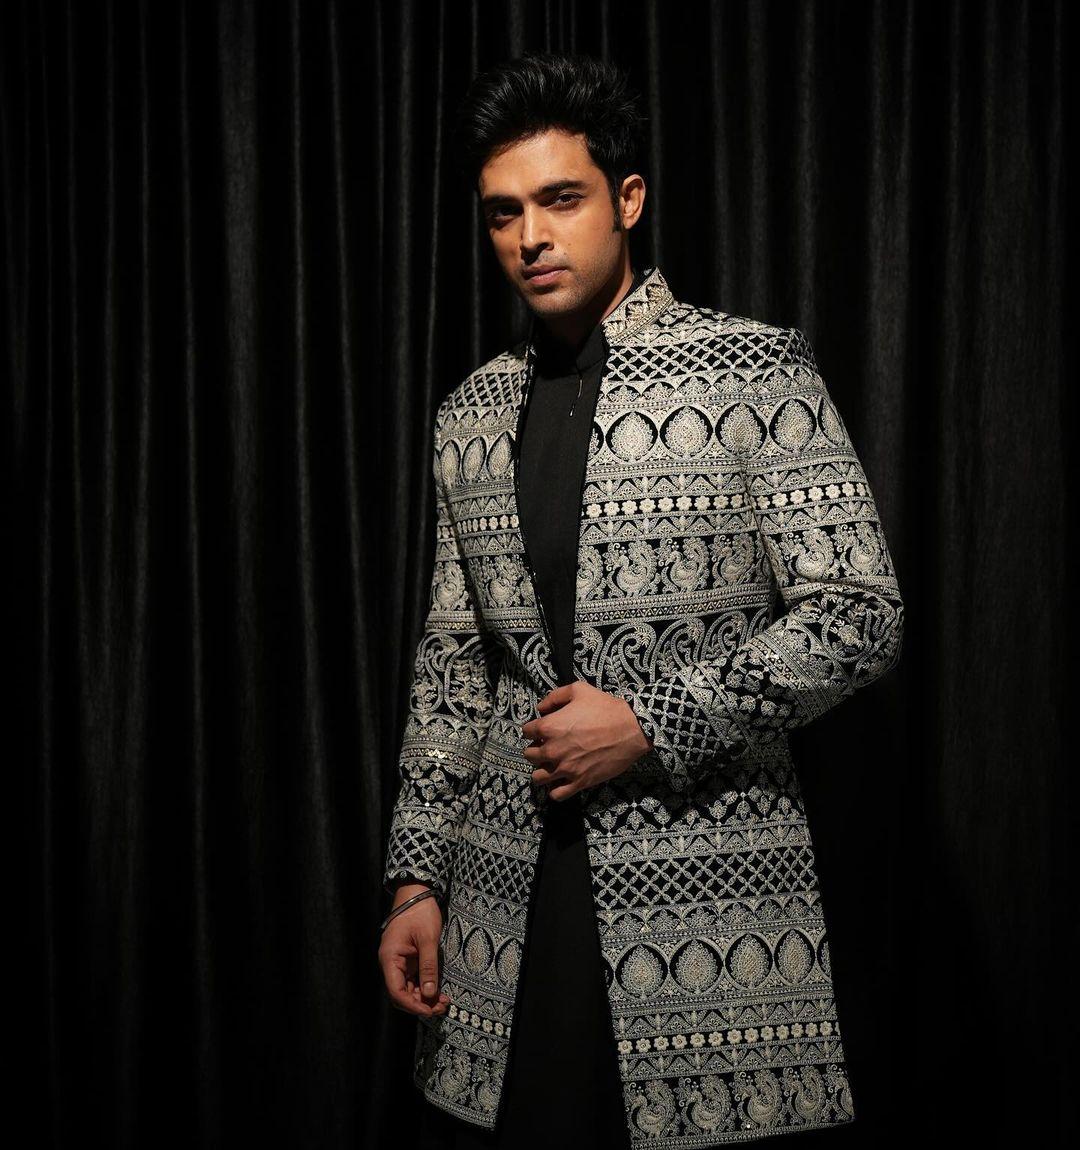 Want an extensive celebration and looking for a heavy outfit to match the vibe? Then go for this black kurta paired with a heavily embroidered sherwani. This look will surely get you praise from your loved ones